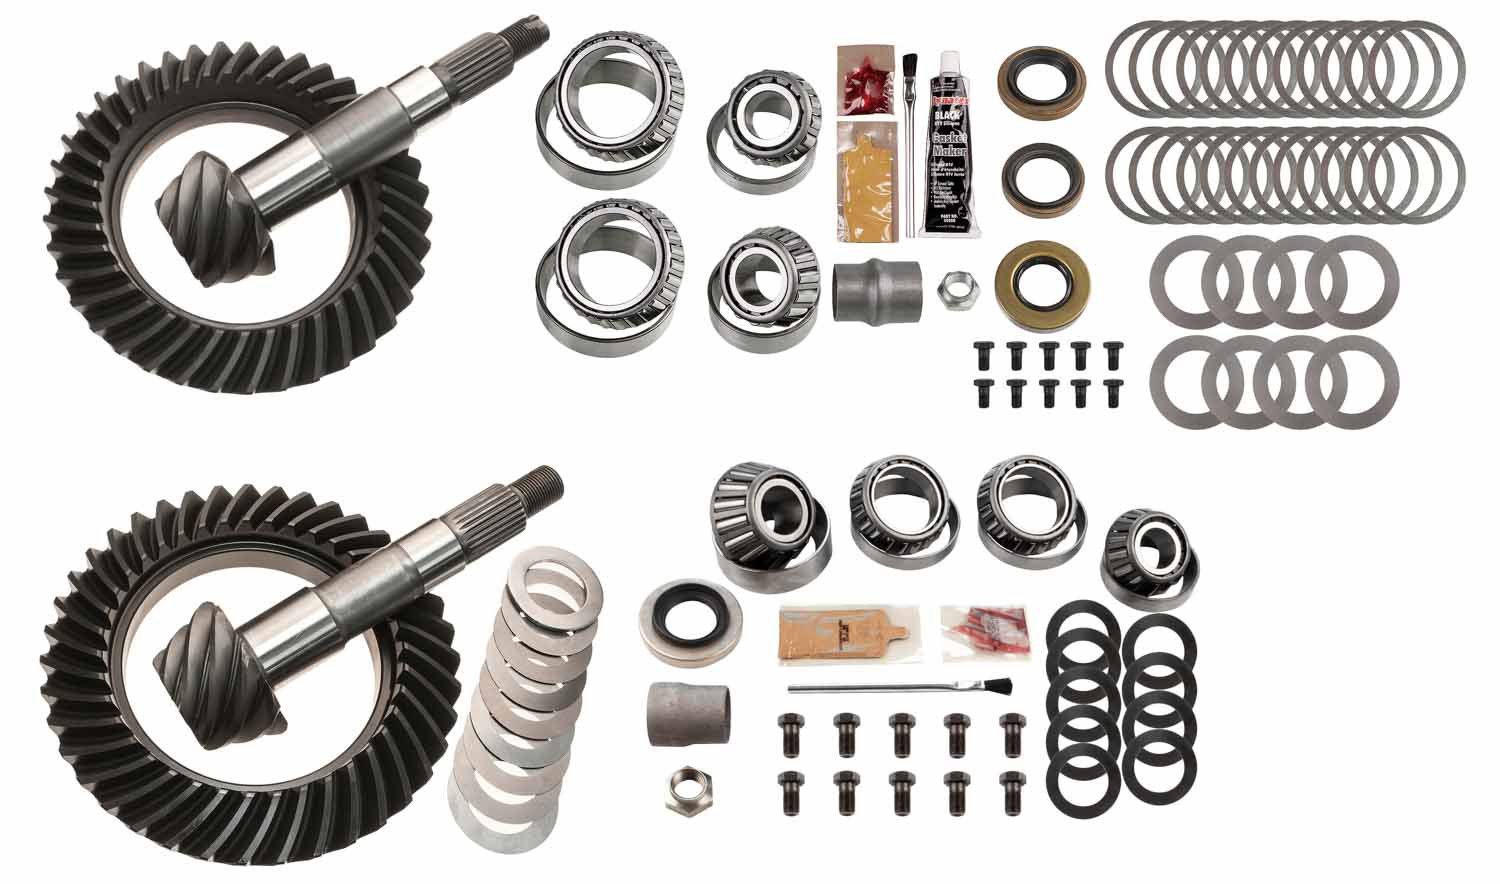 Complete Front and Rear Ring and Pinion Kit 1989-1995 Toyota Pickup, 4Runner V6 - 4.88 Ratio